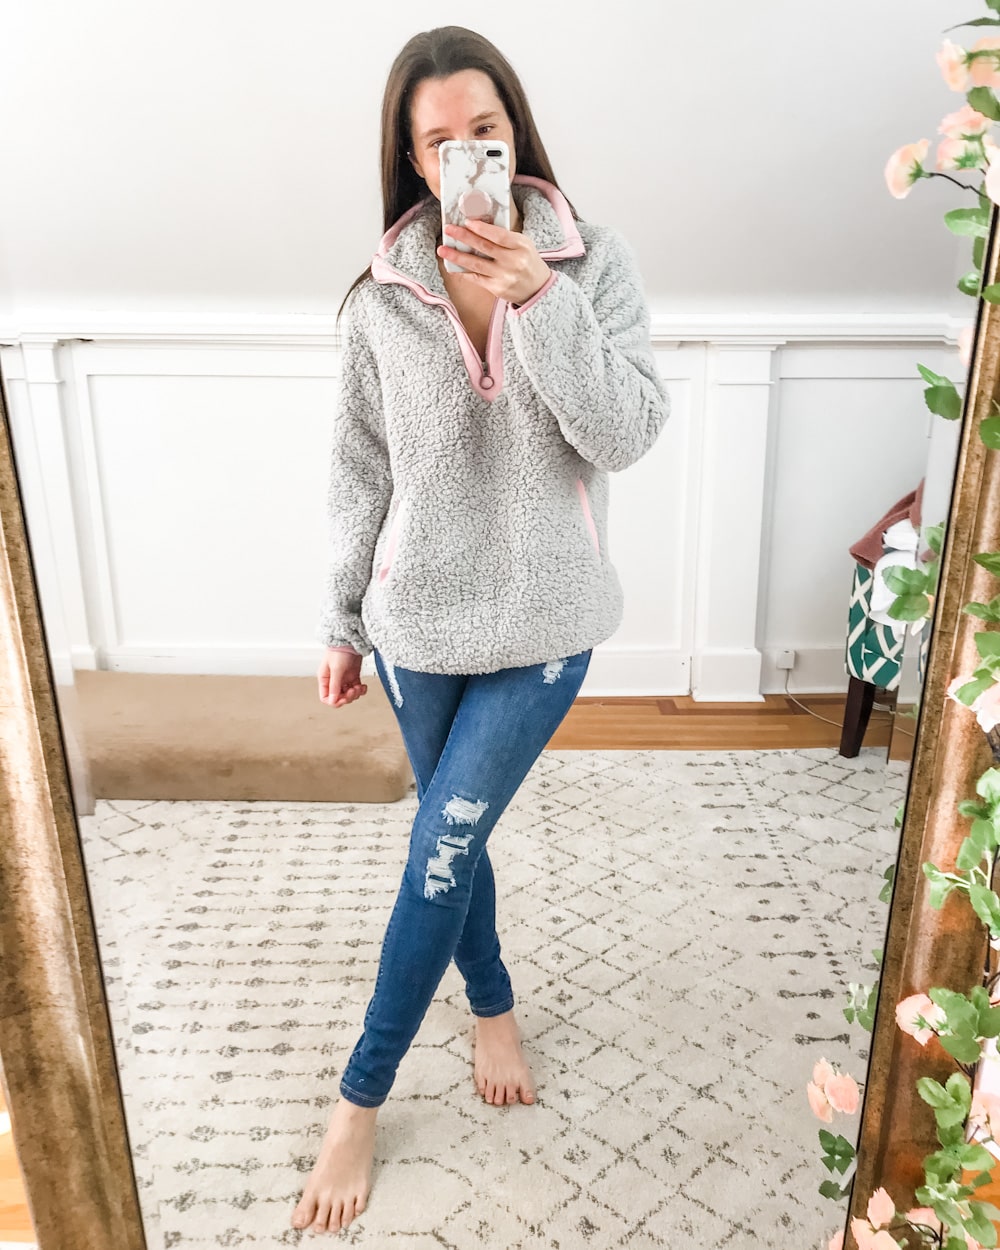 Amazon fleece pullover worn by affordable fashion blogger Stephanie Ziajka of Diary of a Debutante